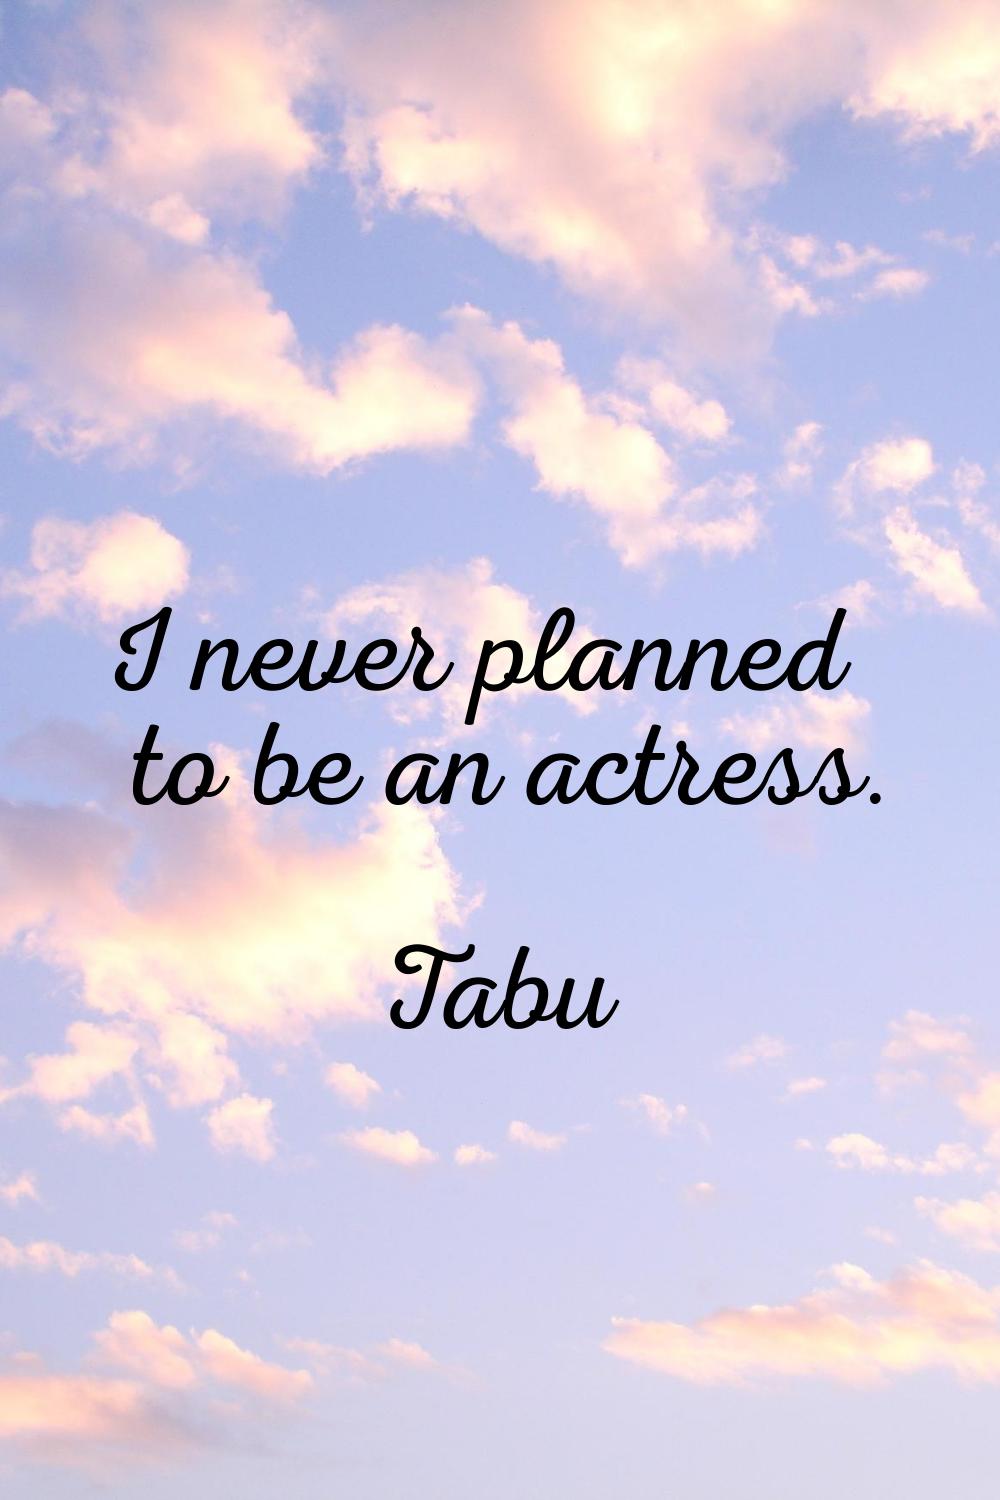 I never planned to be an actress.